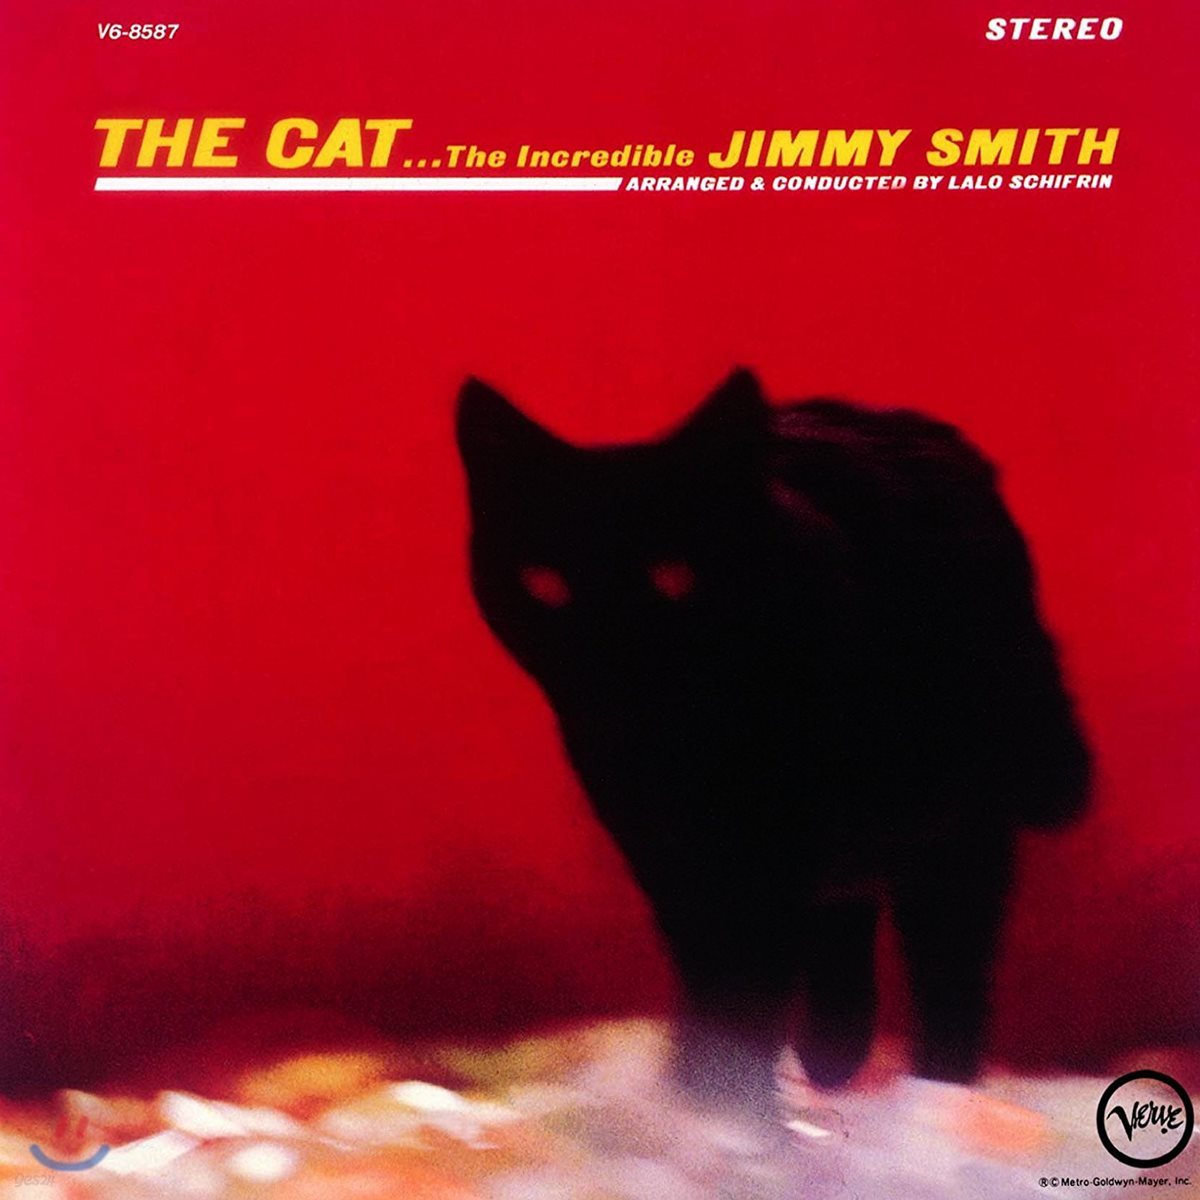 Jimmy Smith (지미 스미스) - The Cat... The Incredible Jimmy Smith